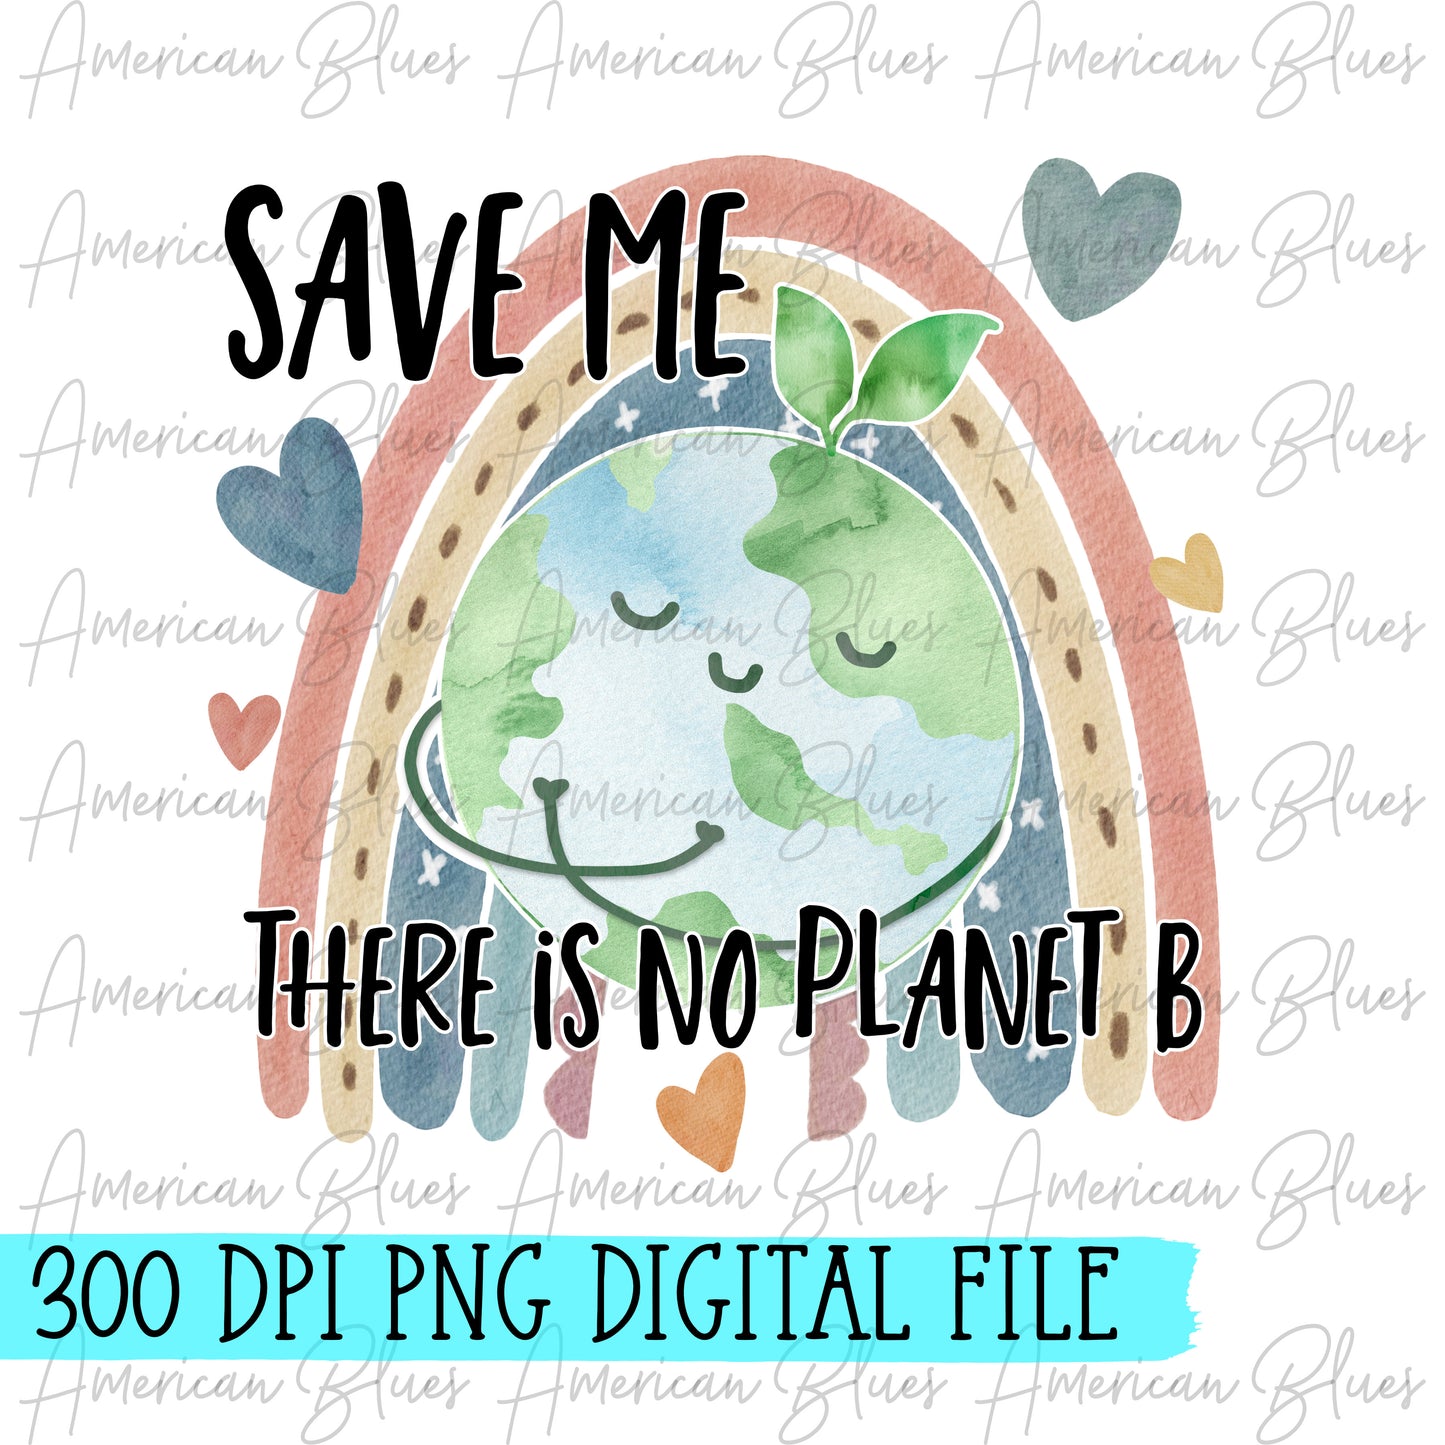 Save me, there is no planet B